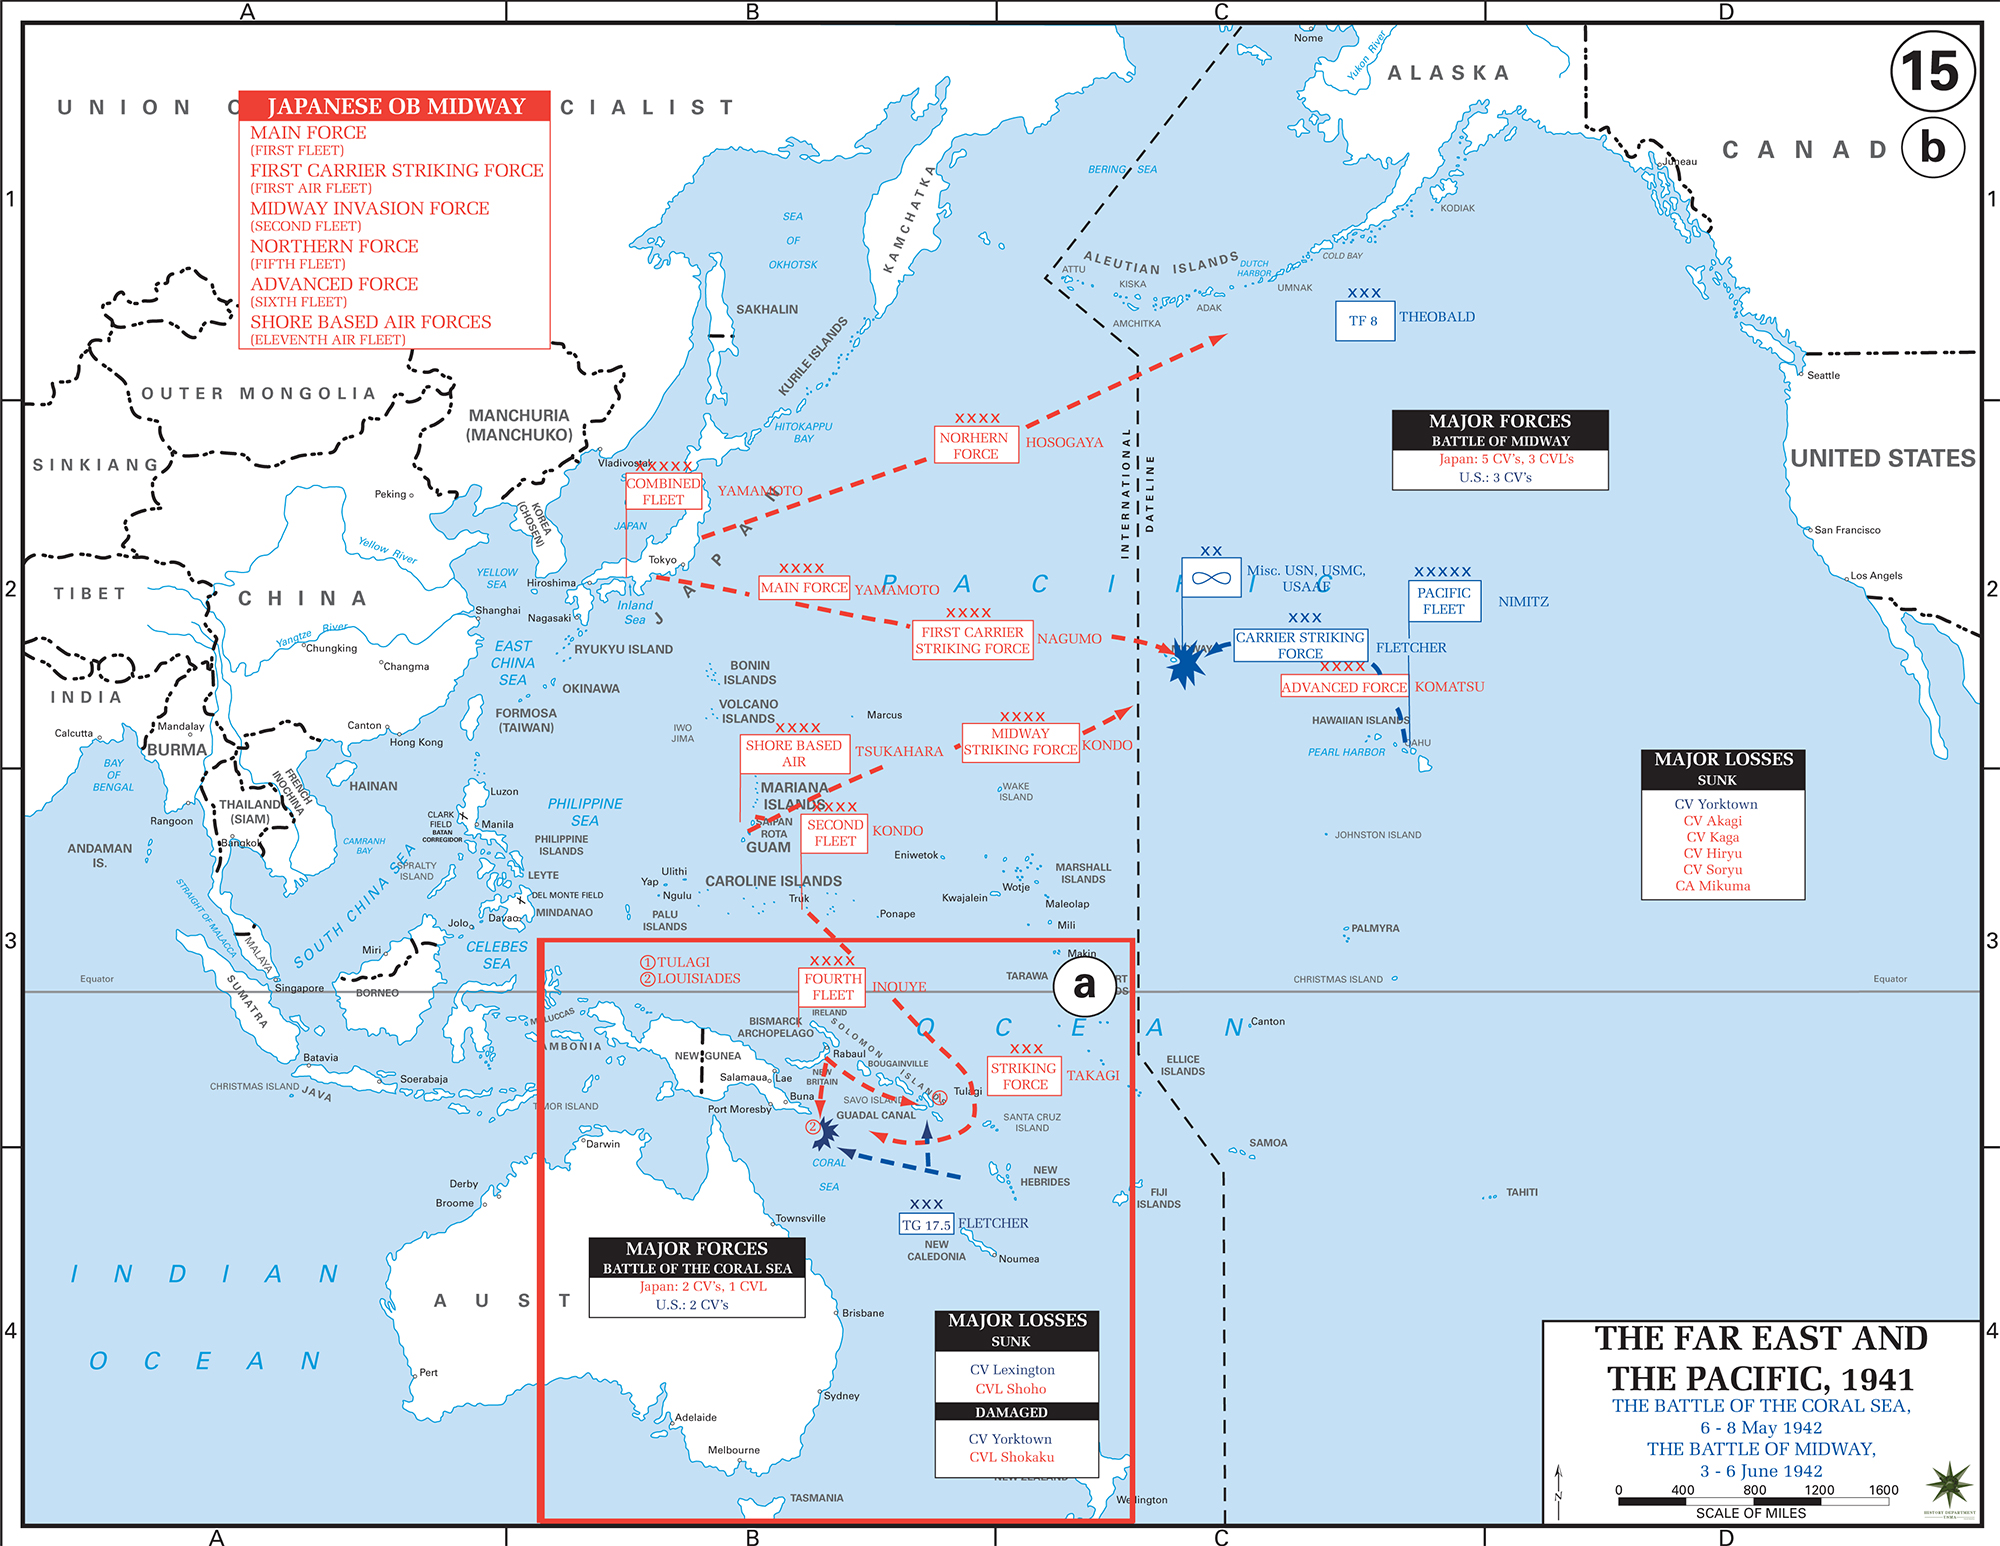 Map of World War II: The Far East and the Pacific. The Battle of the Coral Sea, May 4-8, 1942. The Battle of Midway, June 3-6, 1942.